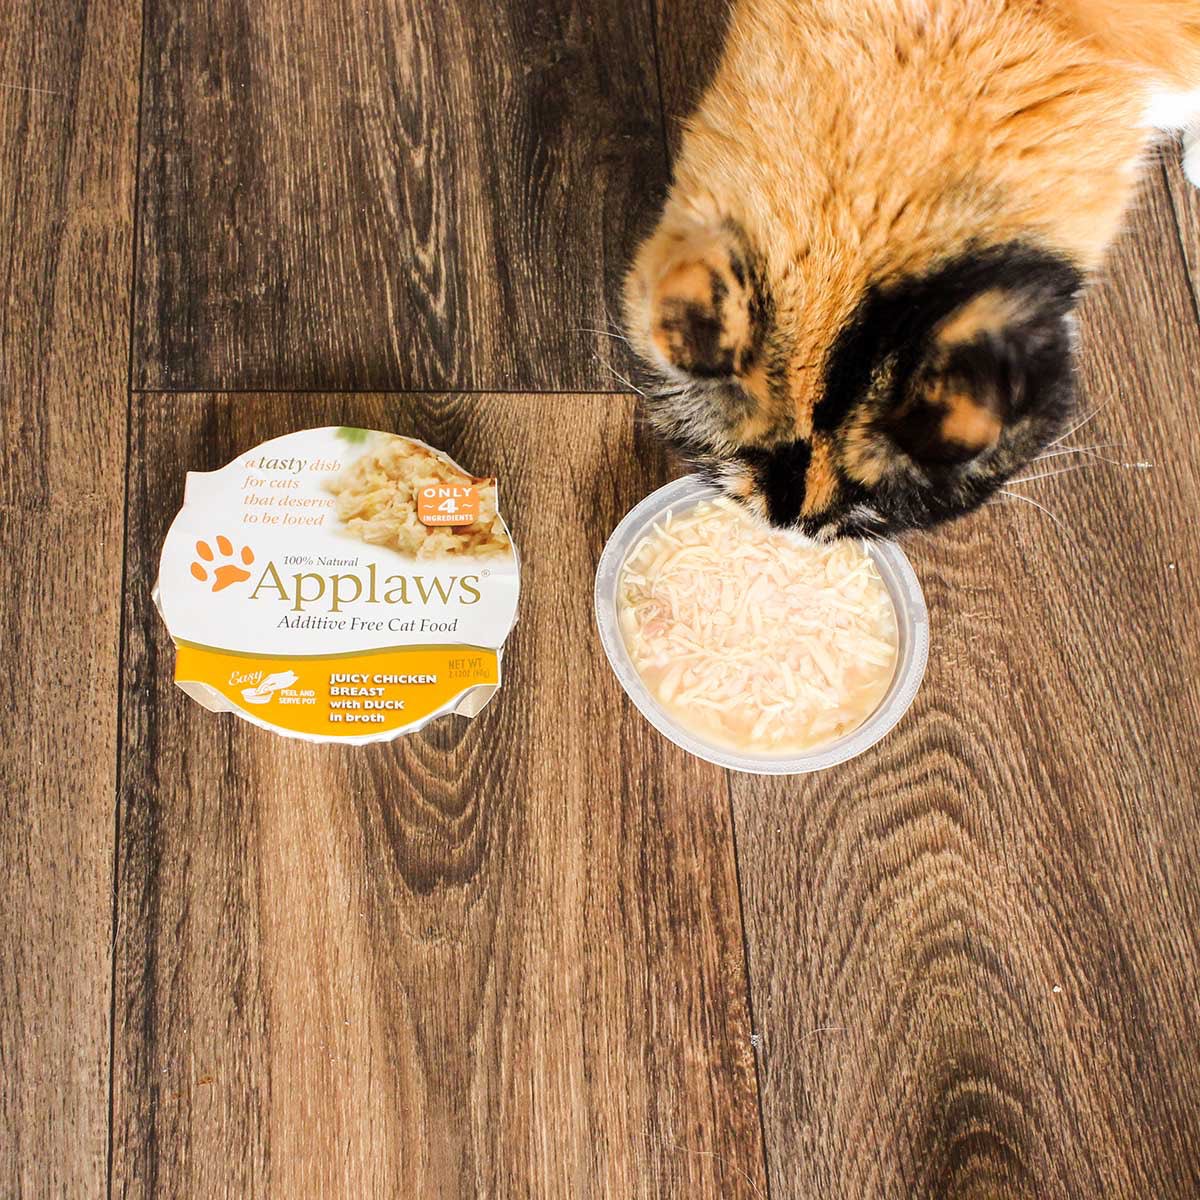 Ever wonder why our #catfood packaging is clear? It's because our food has #NothingAdded #NothingHidden #AskApplaws